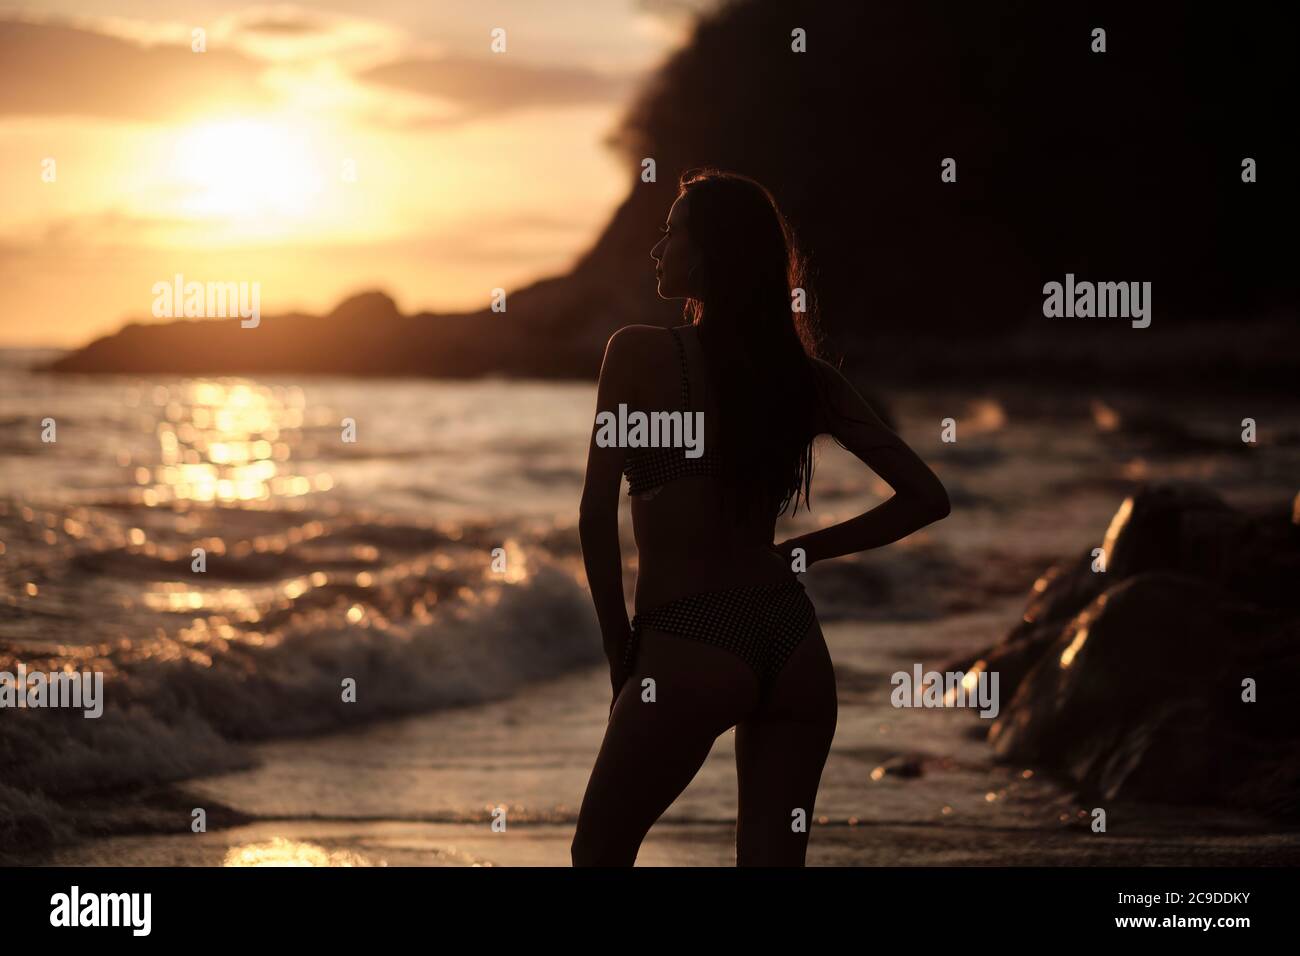 Sunset silhouette of young woman at a beach Stock Photo